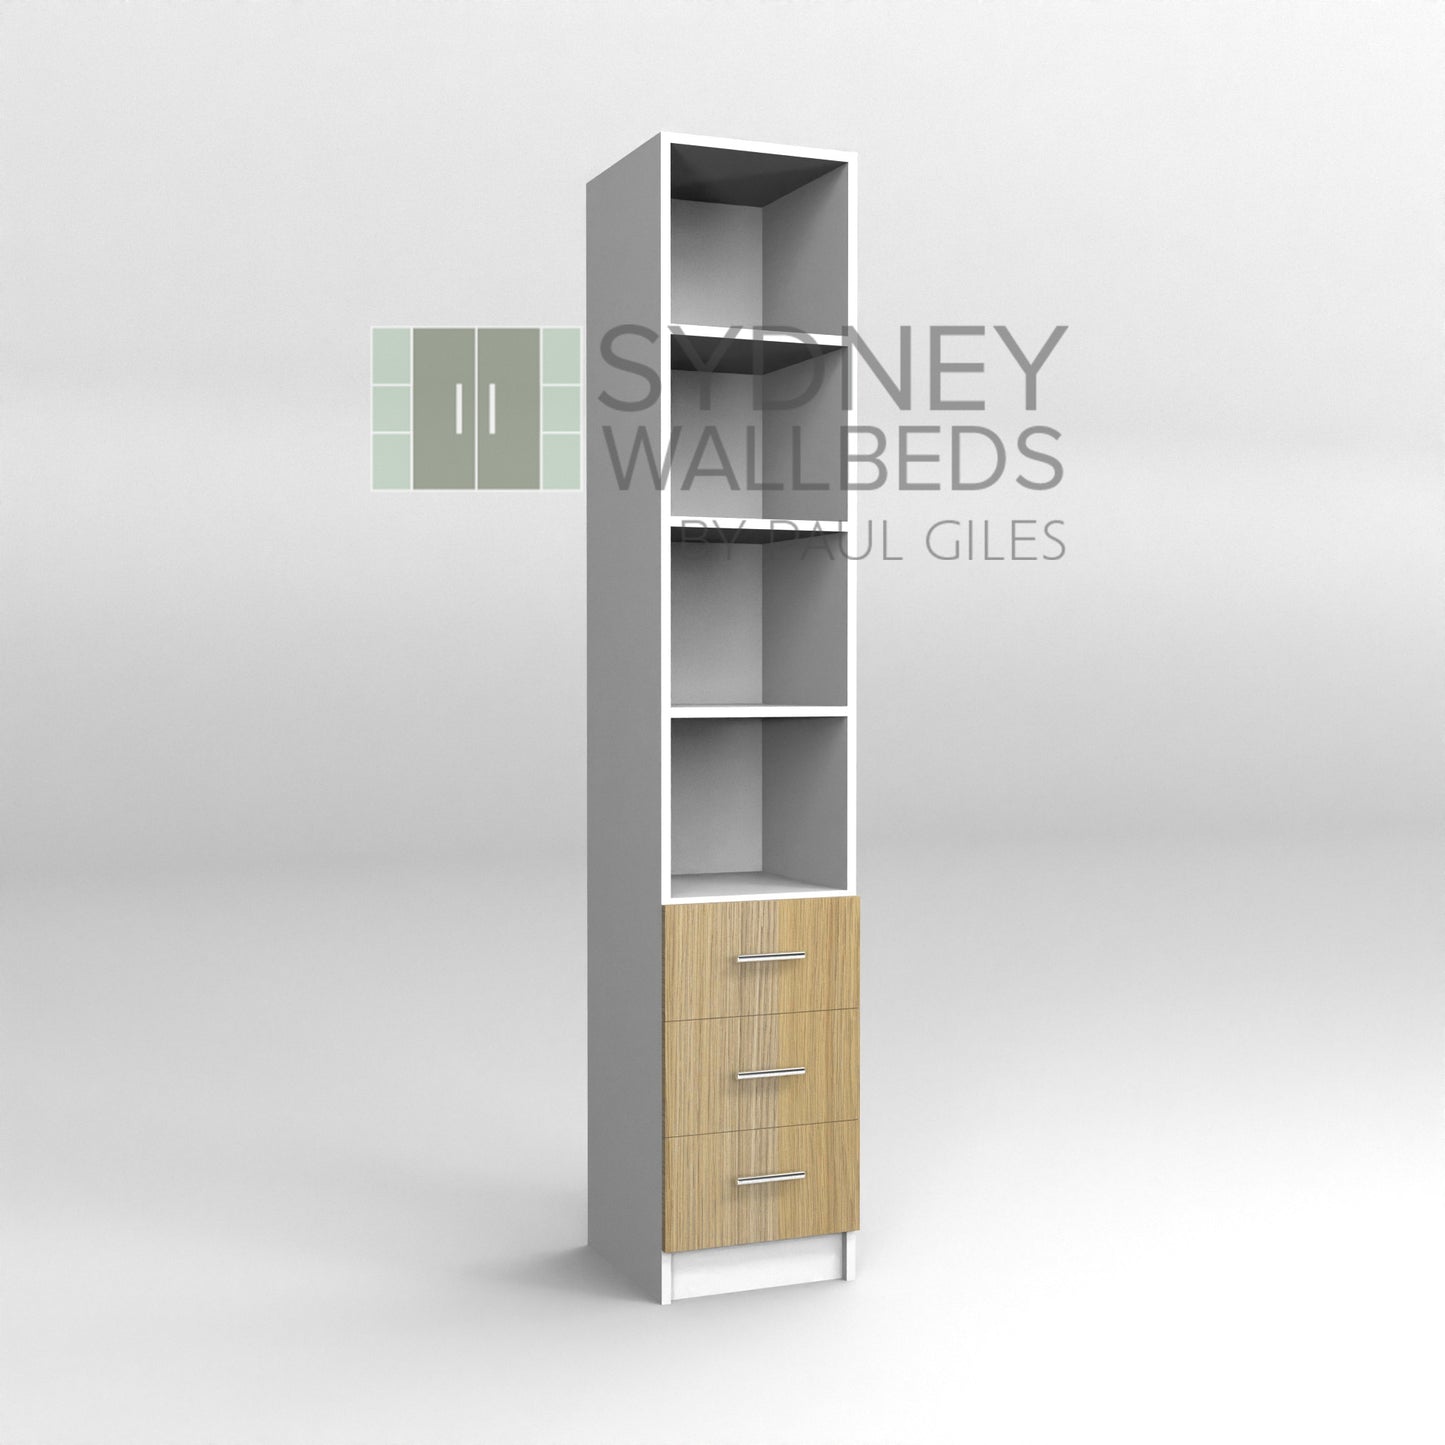 BOOKCASES - Alpha WallBed - (Modern Colour Range)